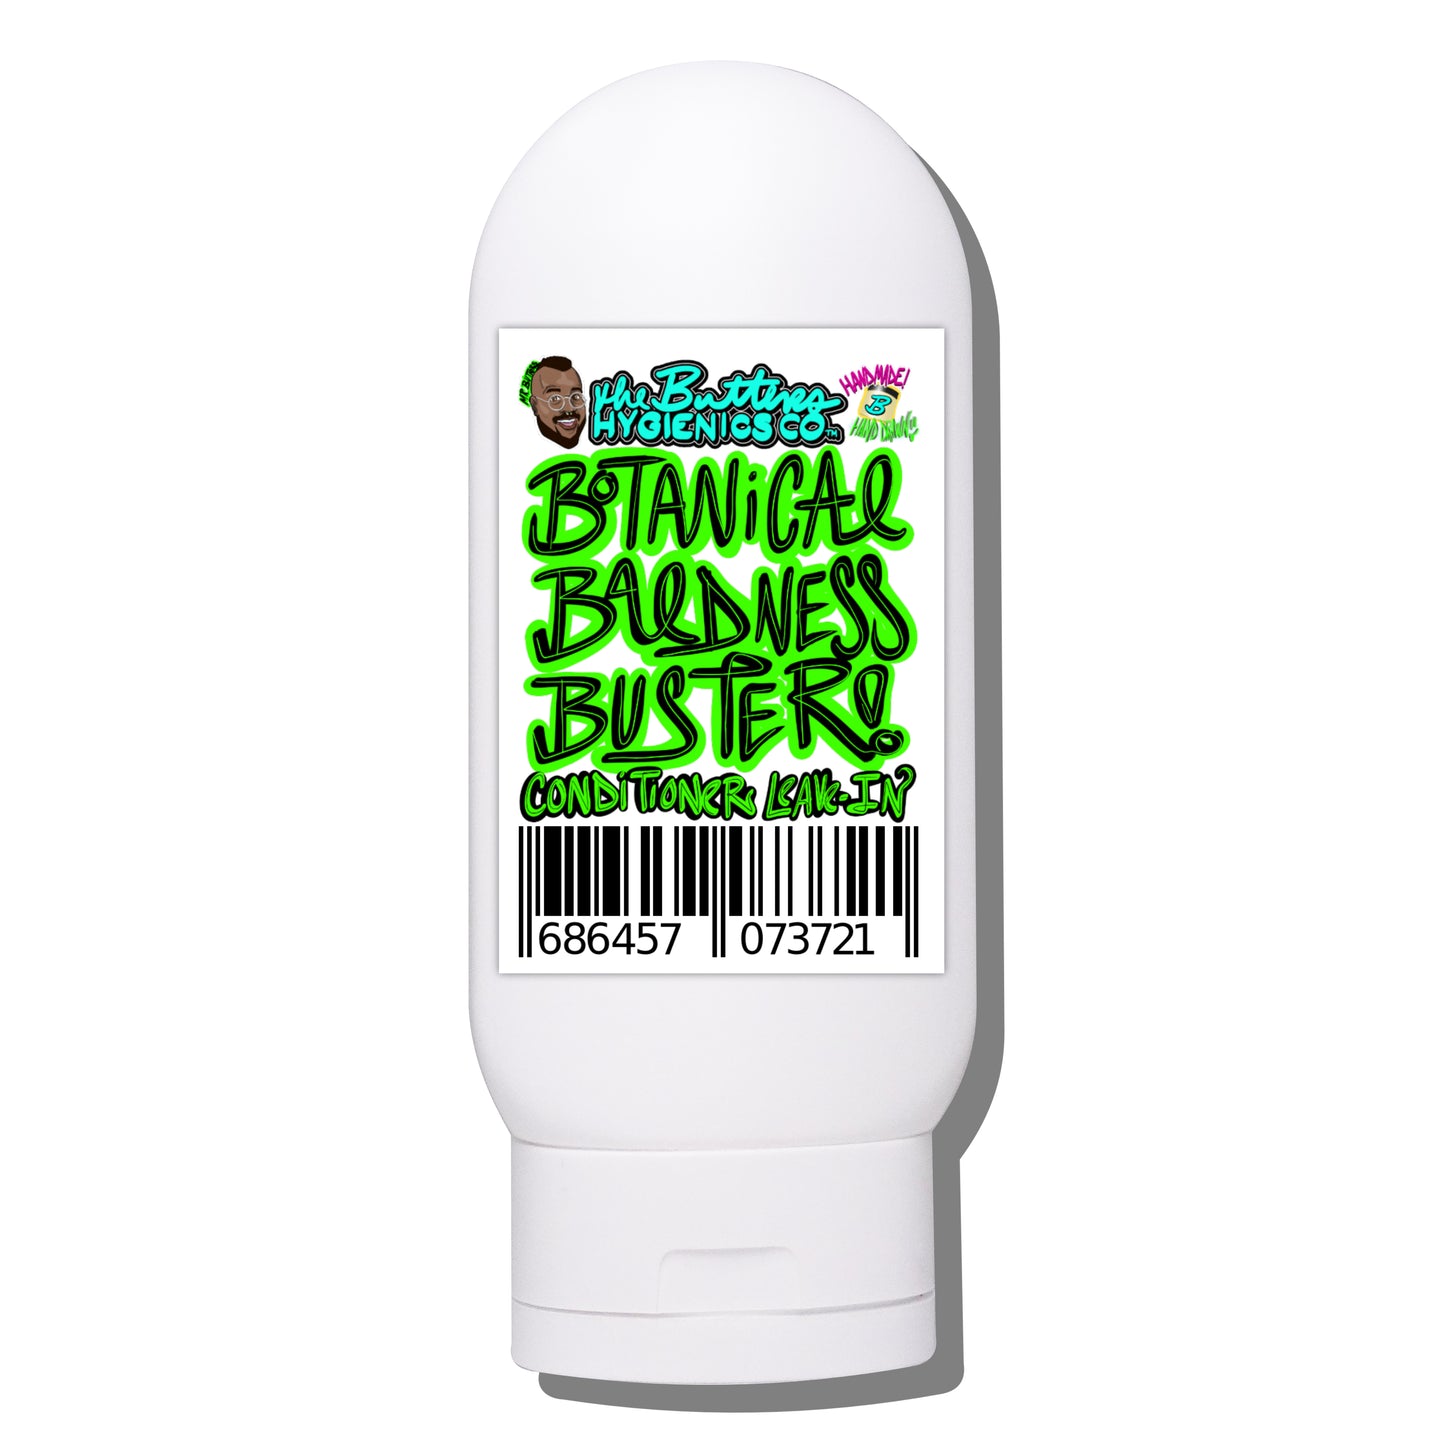 Botanical Baldness 🧑‍🦲 Buster w/ Stinging Nettles, Saw Palmetto, Rosemary | Hair Growth & Retention